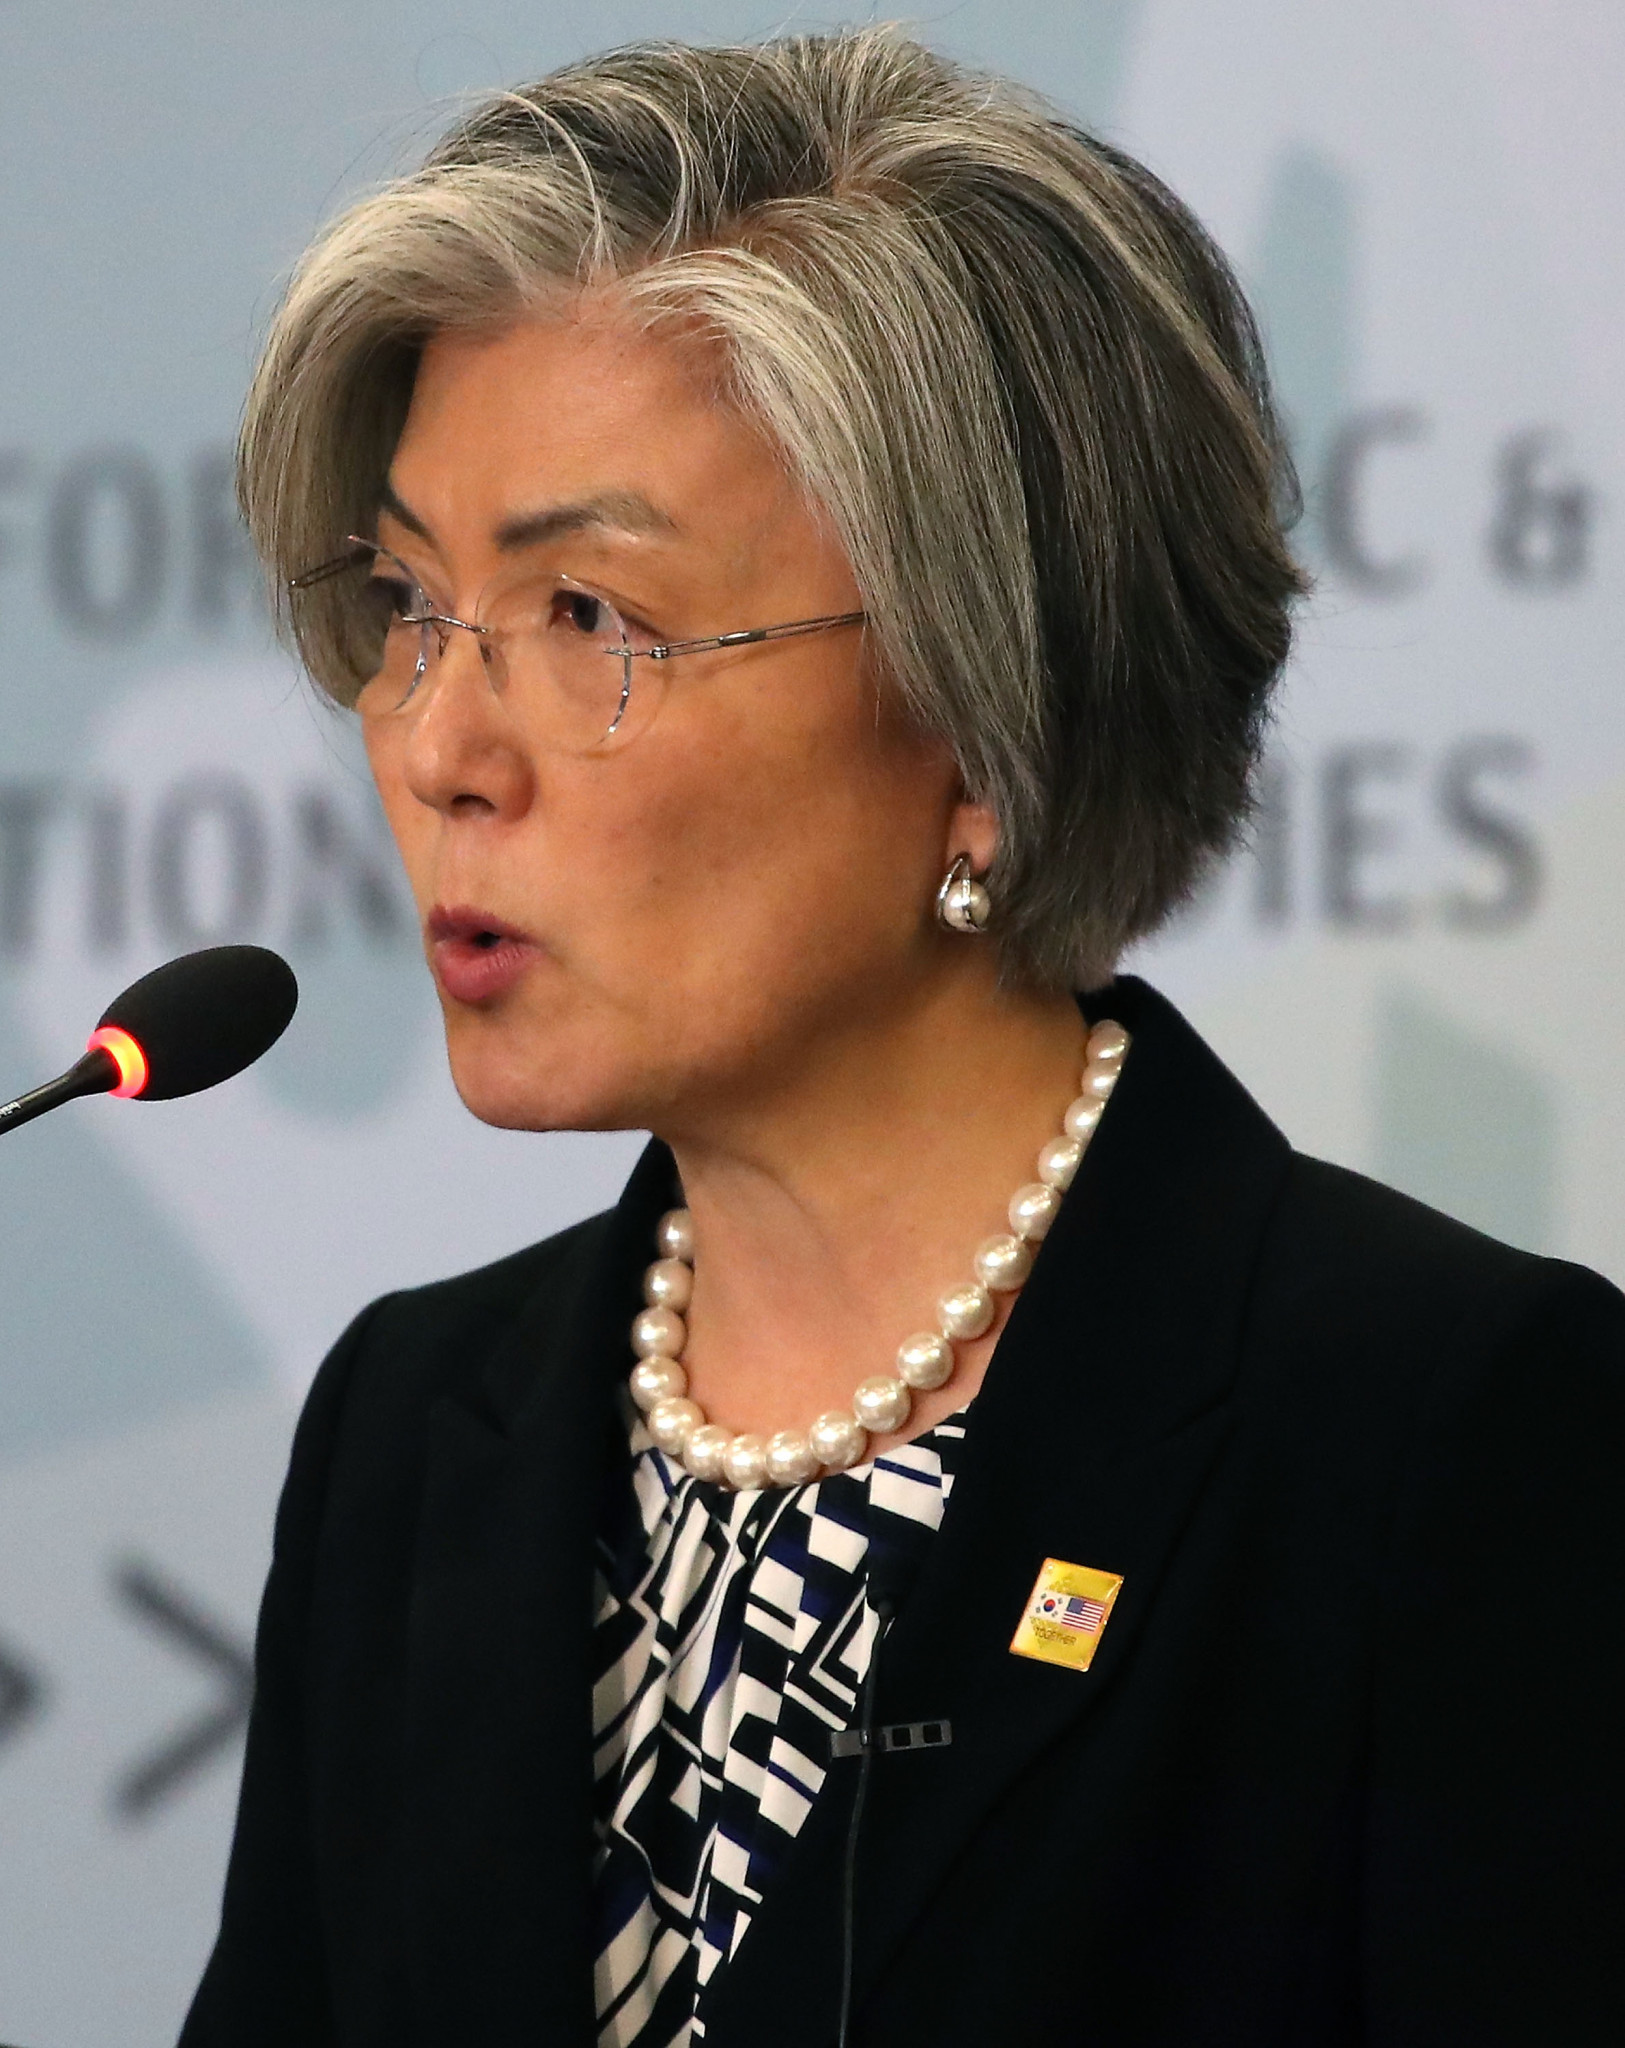 South Korean Foreign Minister Kang Kyung-wha said that North Korea applied to compete at the Winter Paralympics ©Getty Images